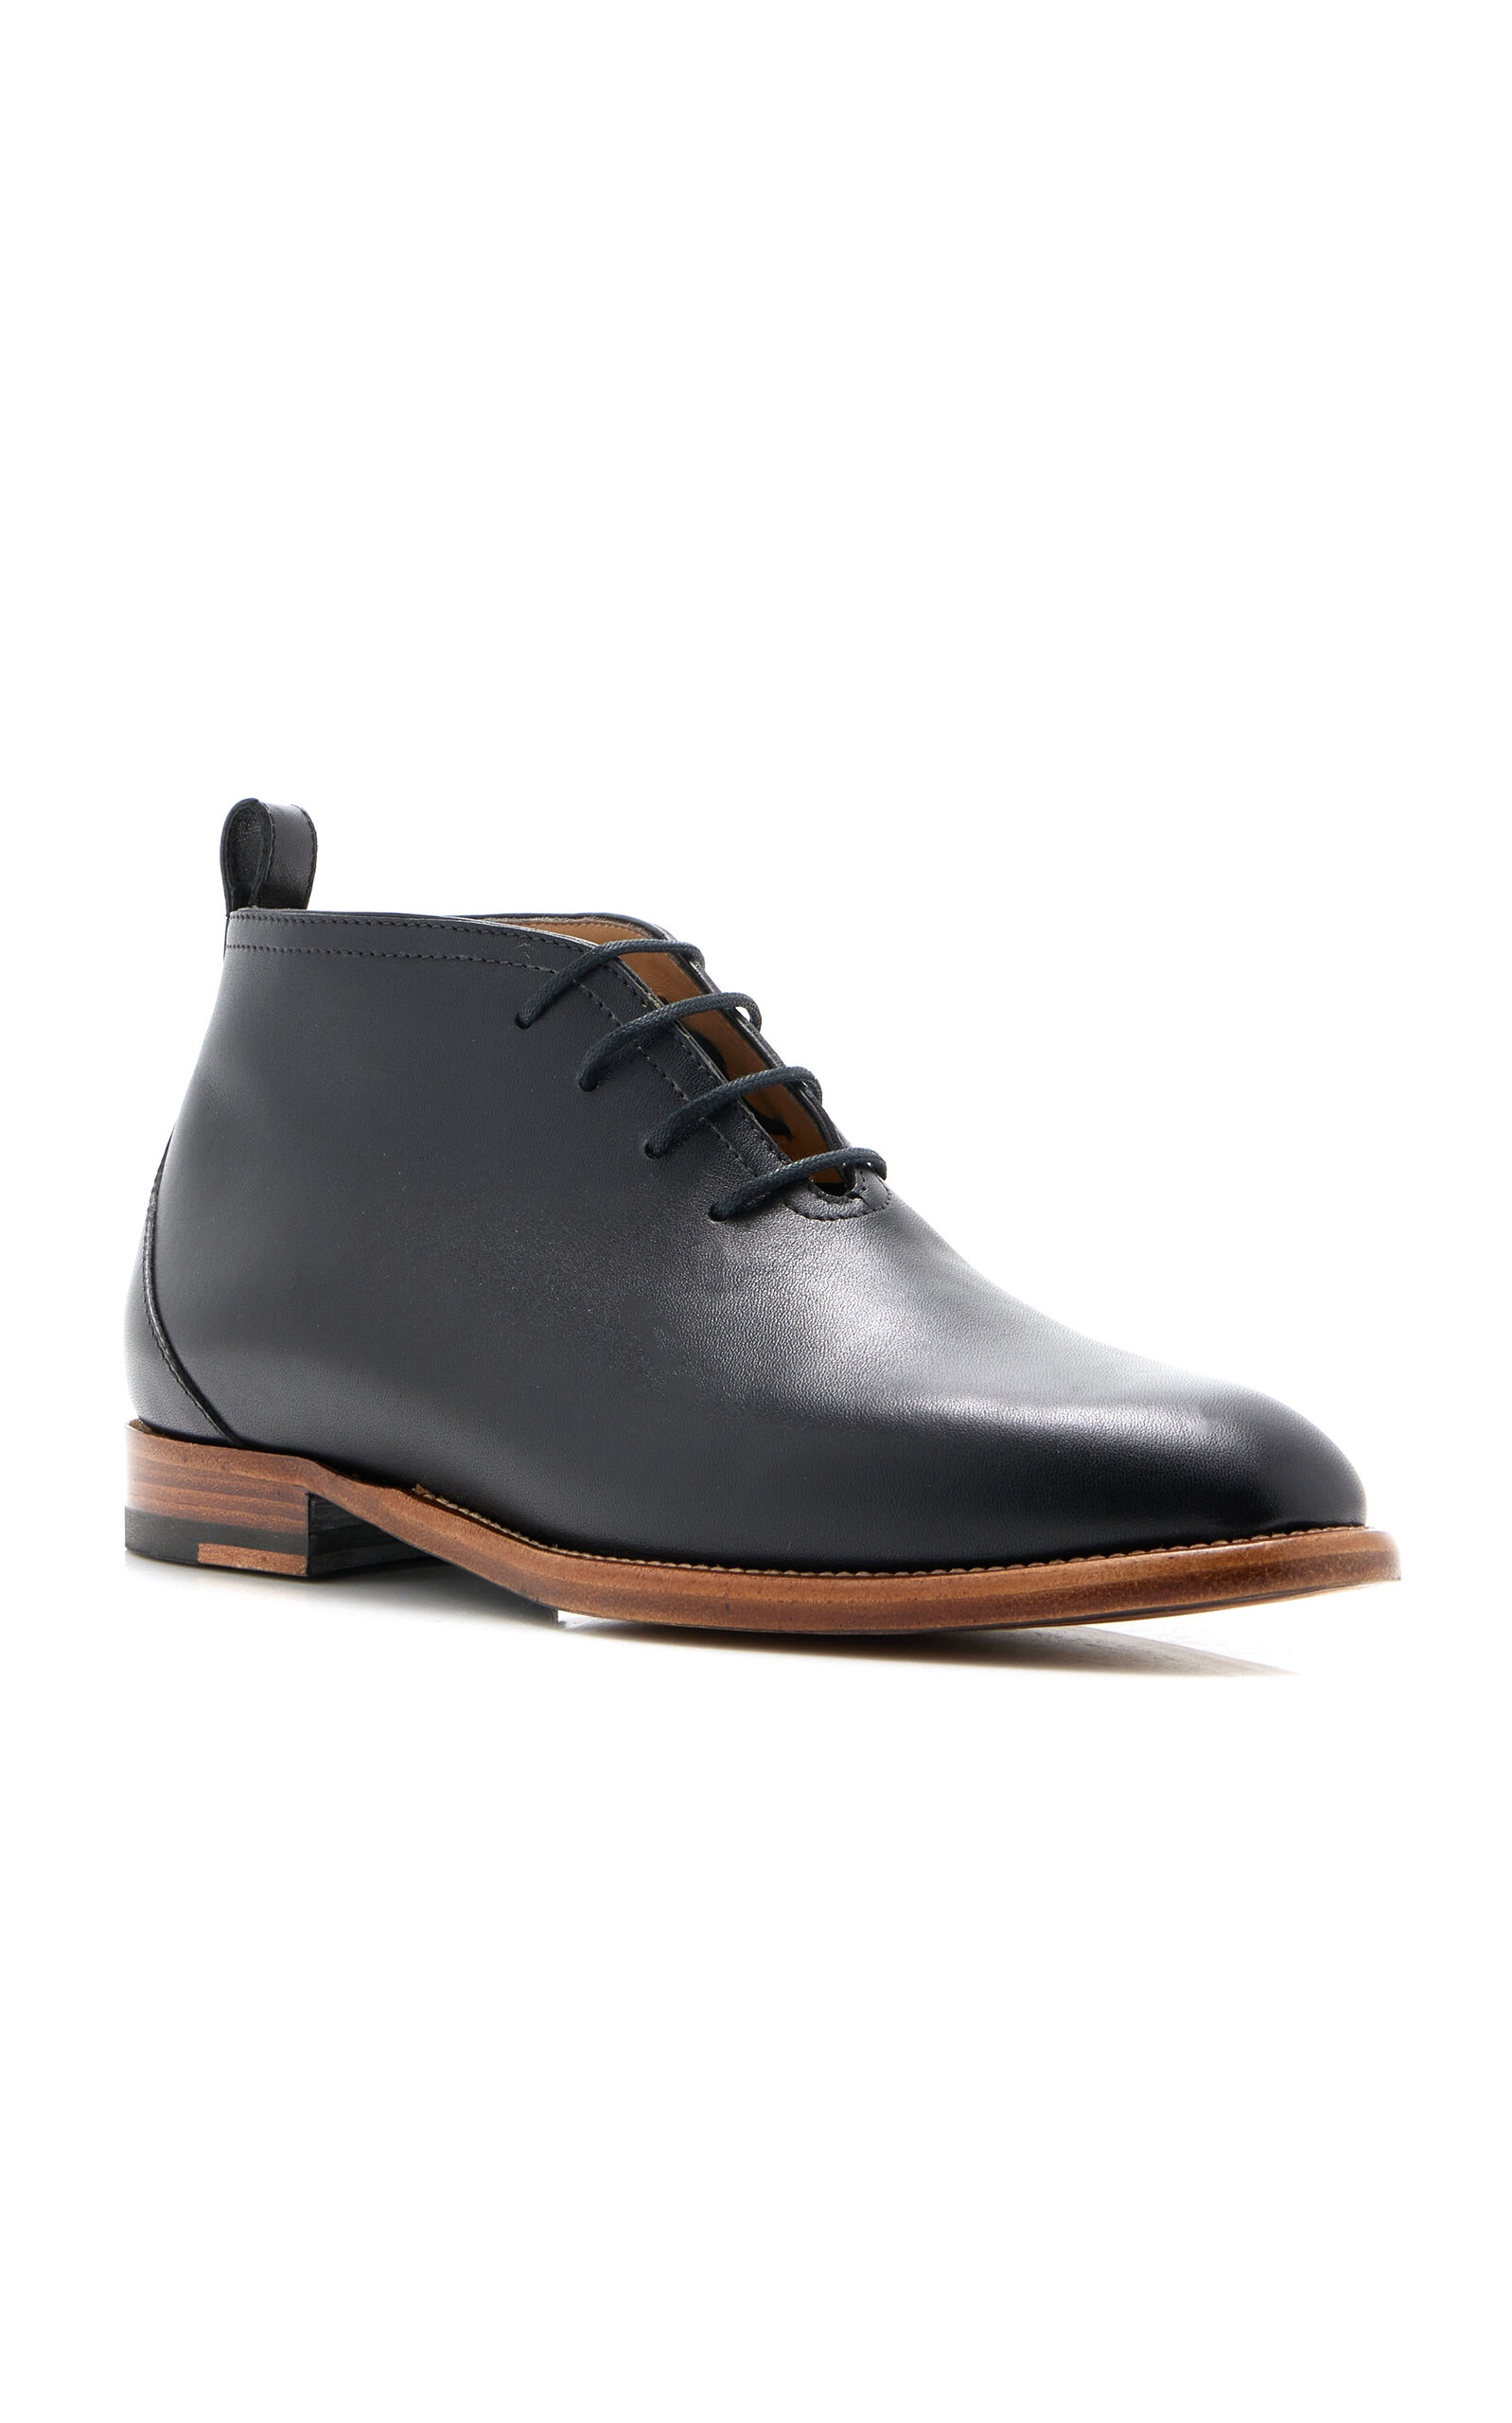 Grant Leather Boots black - 4